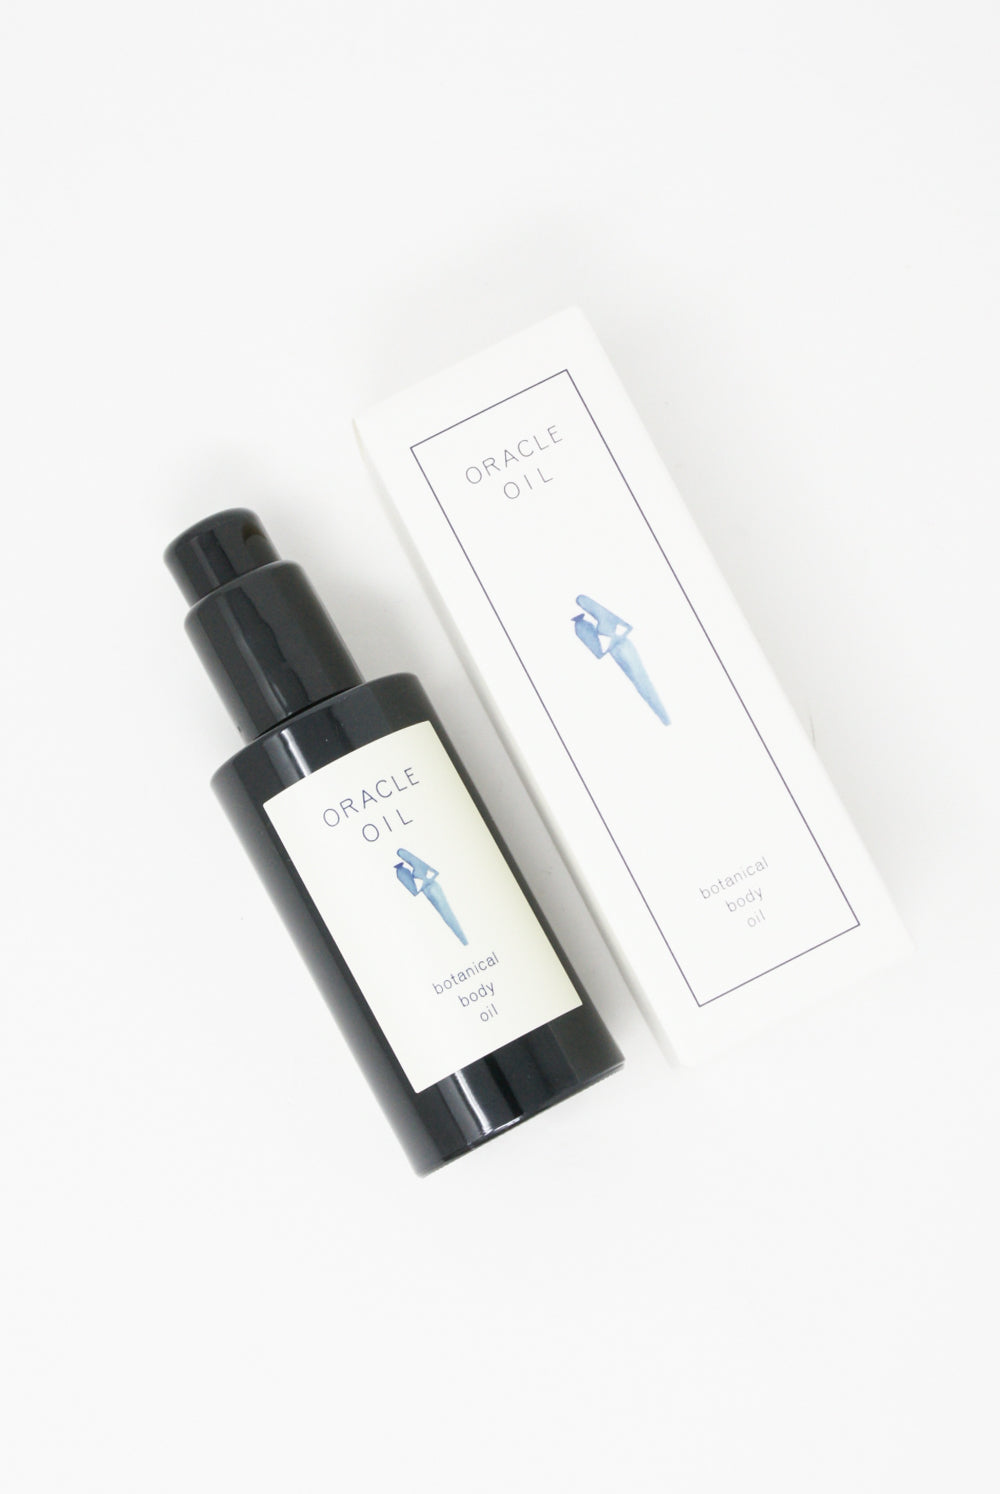 Oracle Oil Botanical Body Oil with packaging